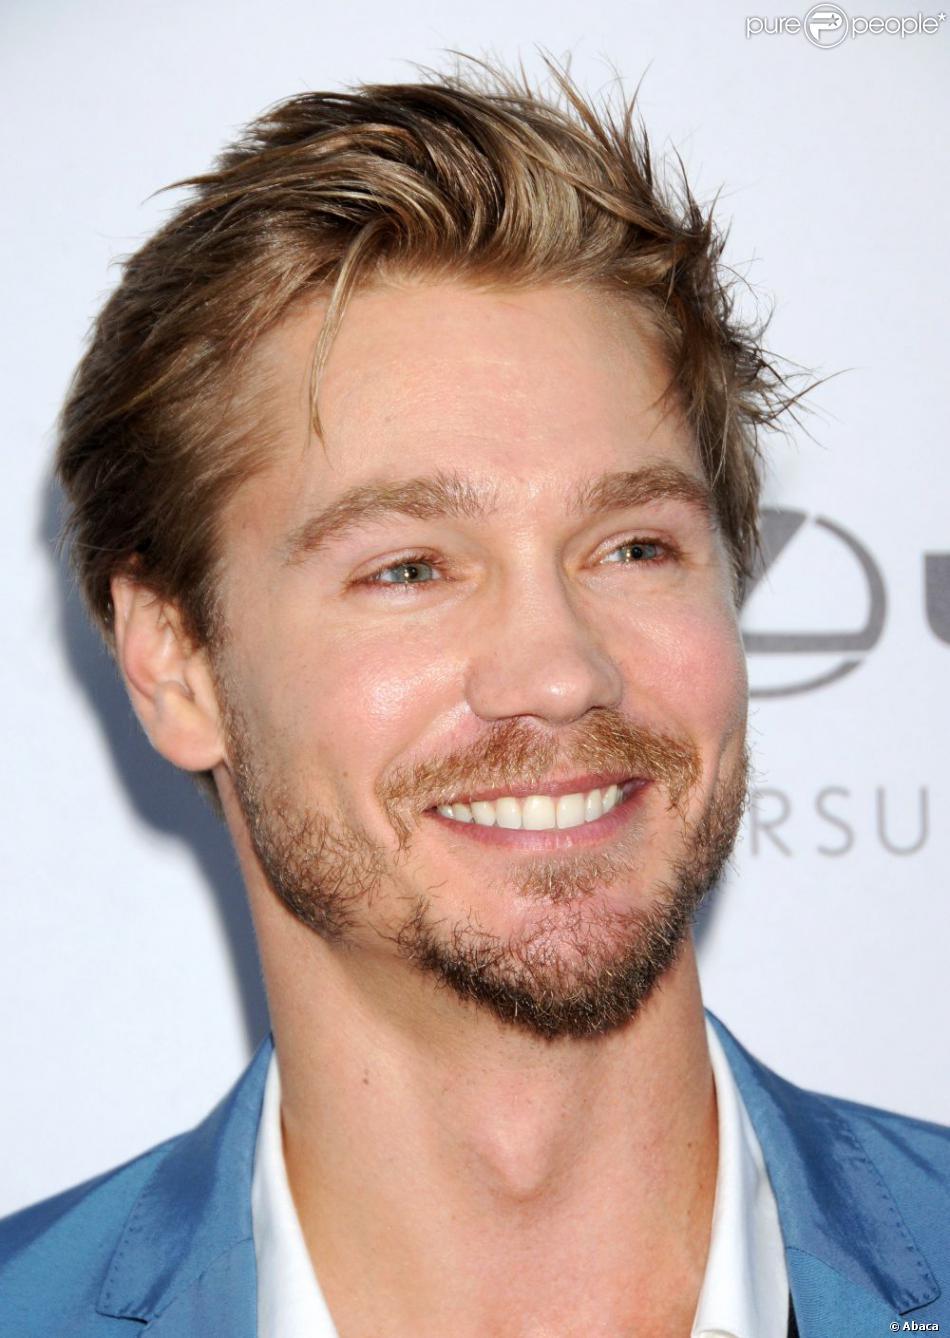 Robert & Chad image Chad Michael Murray HD wallpaper and background